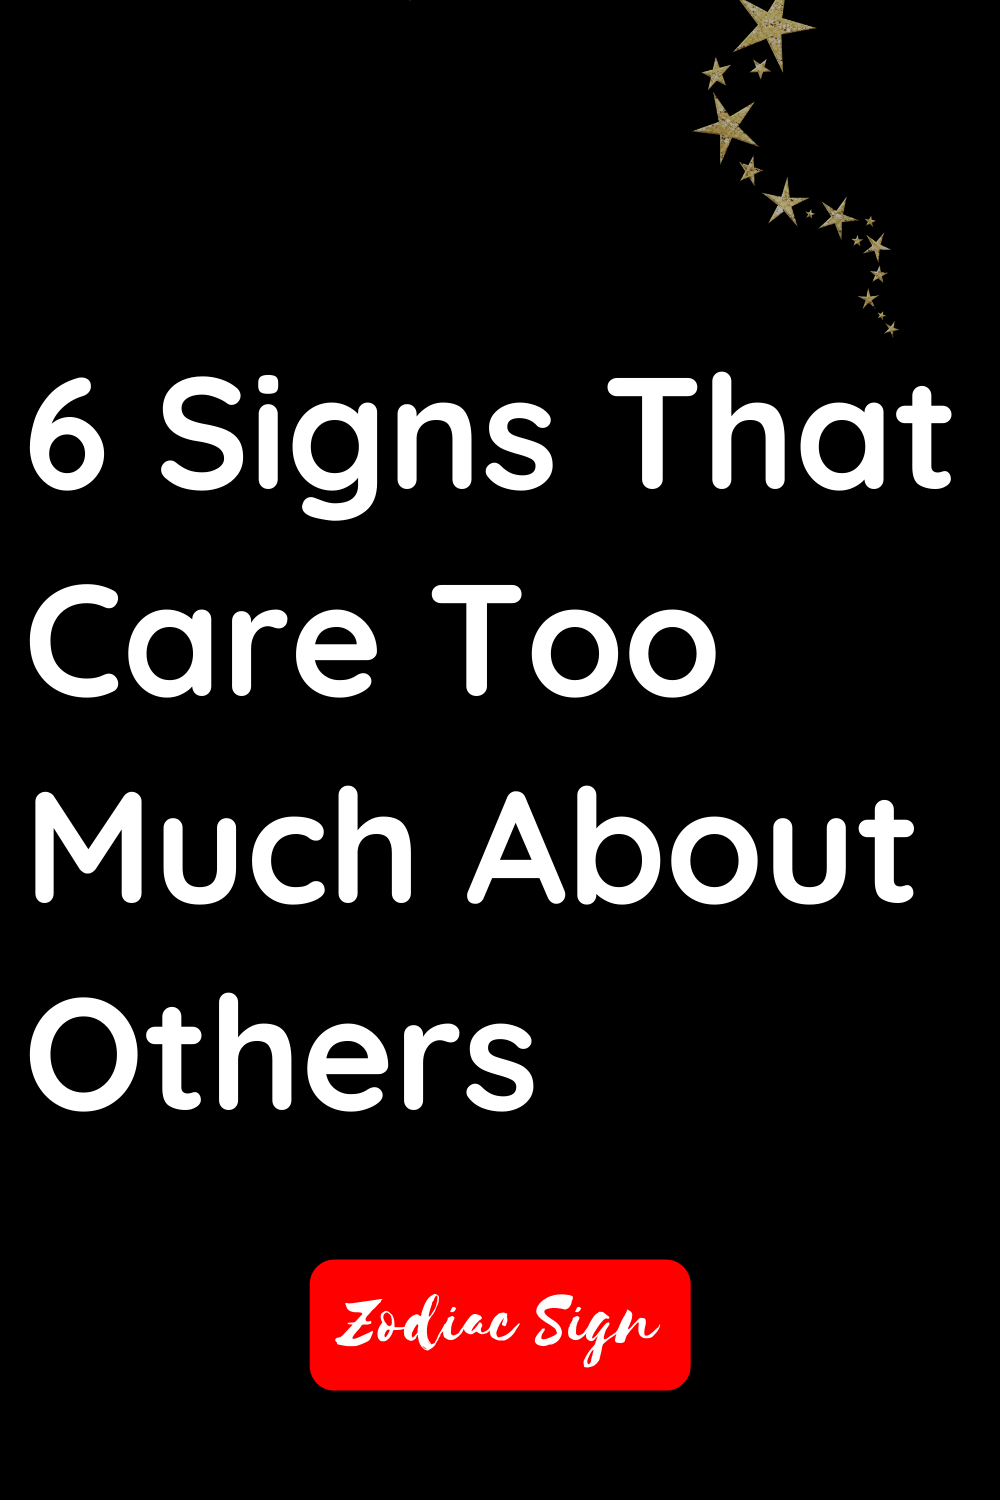 6 signs that care too much about others